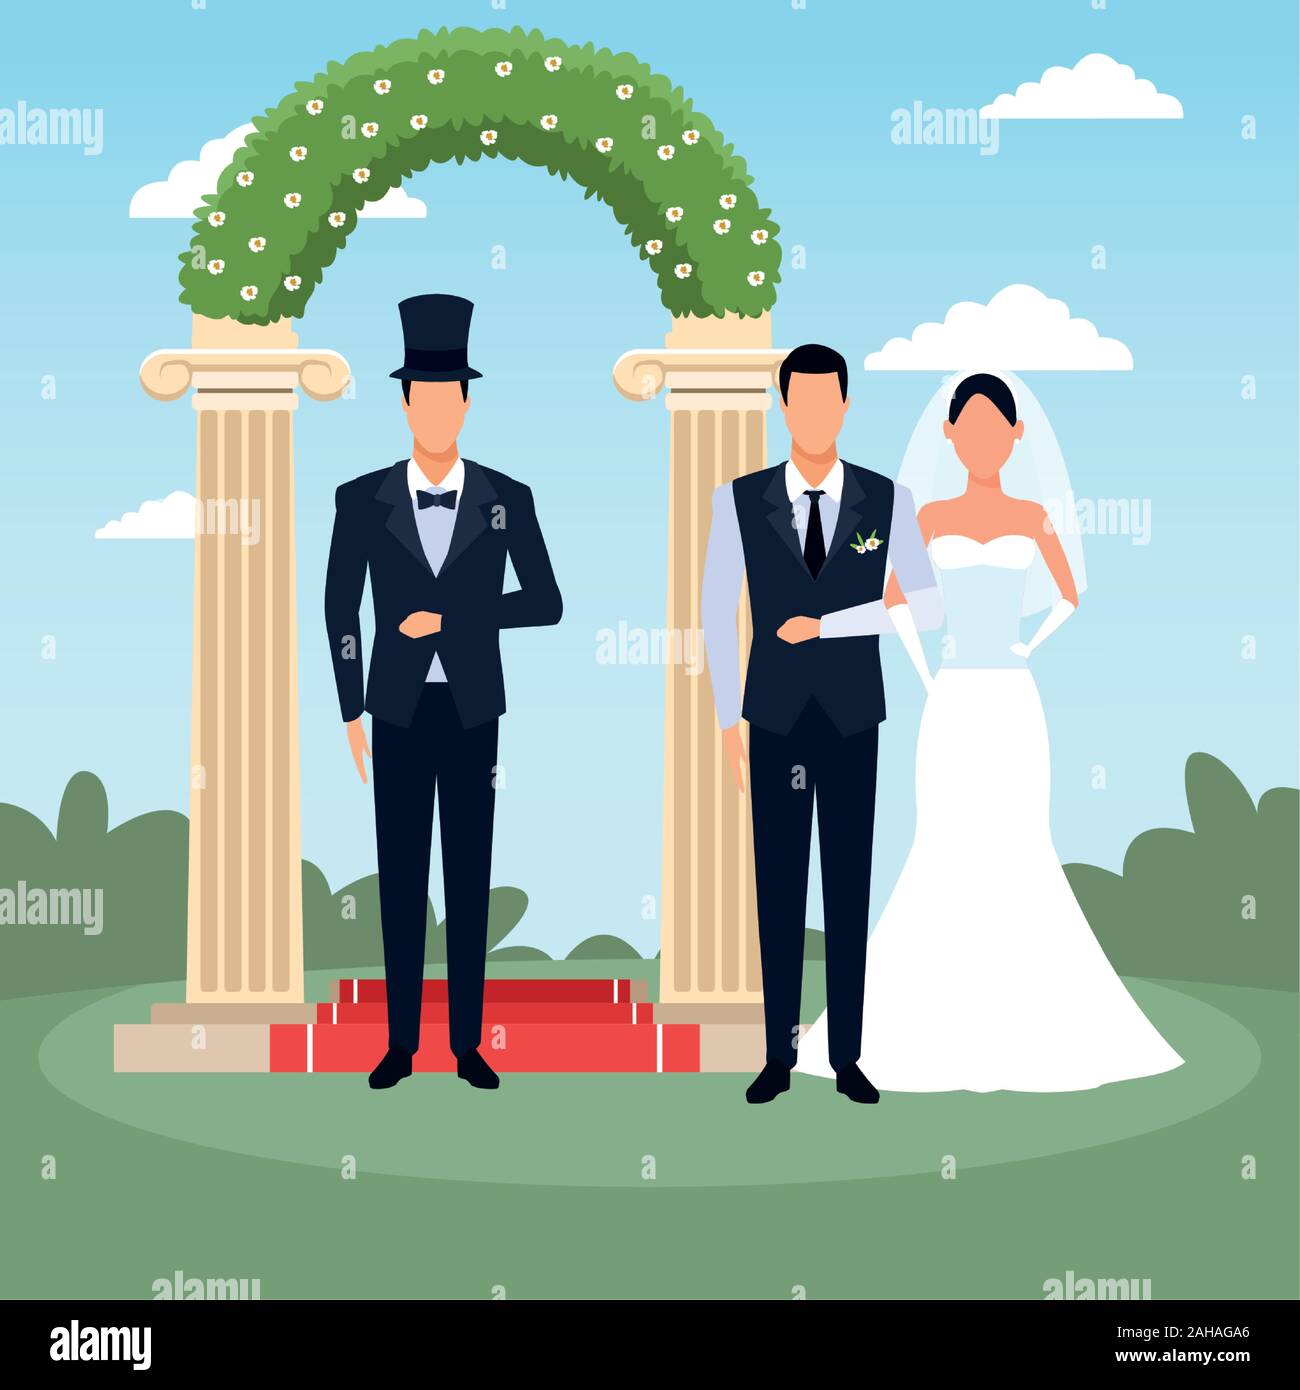 avatar elegant man with bride and groom standing over floral arch and landscape background Stock Vector